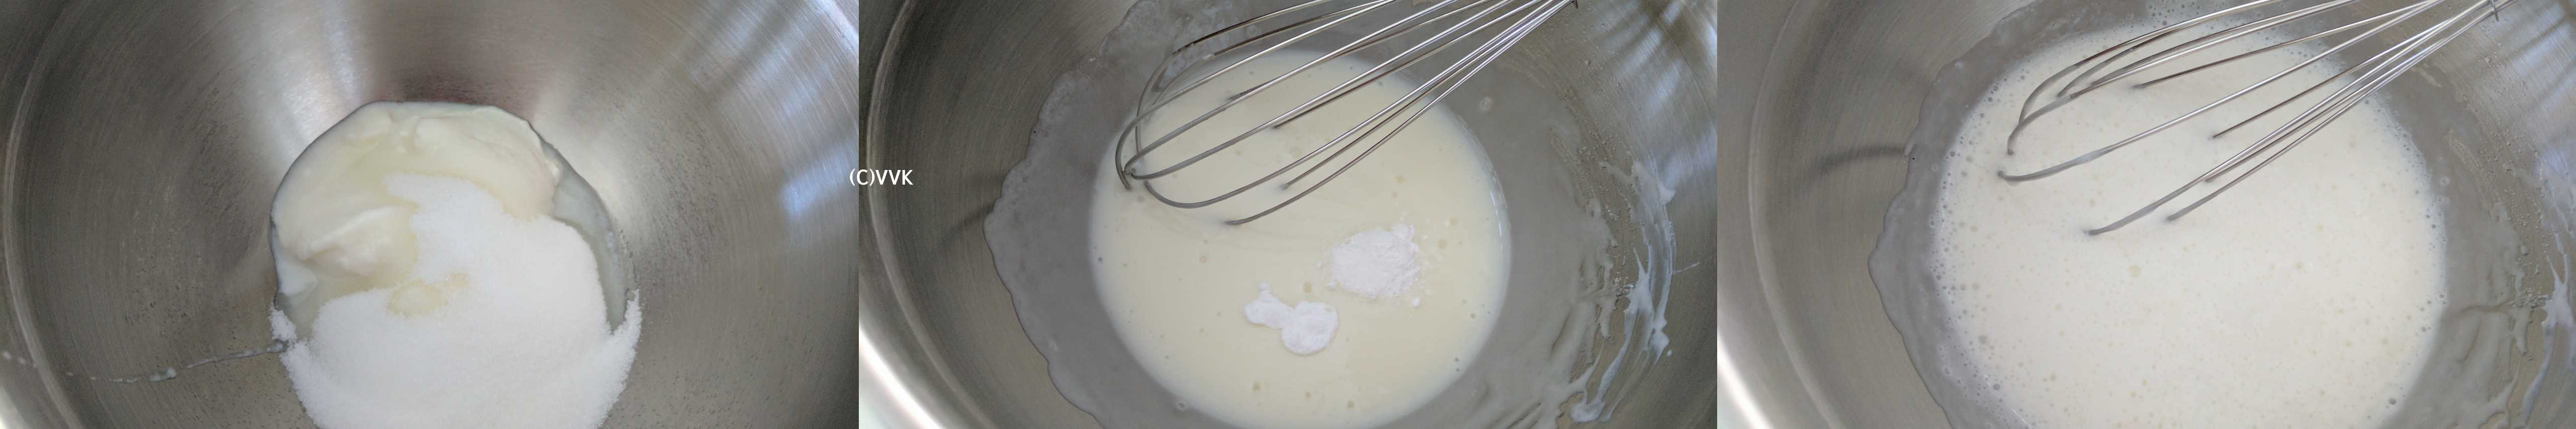 Adding the yogurt and sugar in a wide bowl and whisking them together